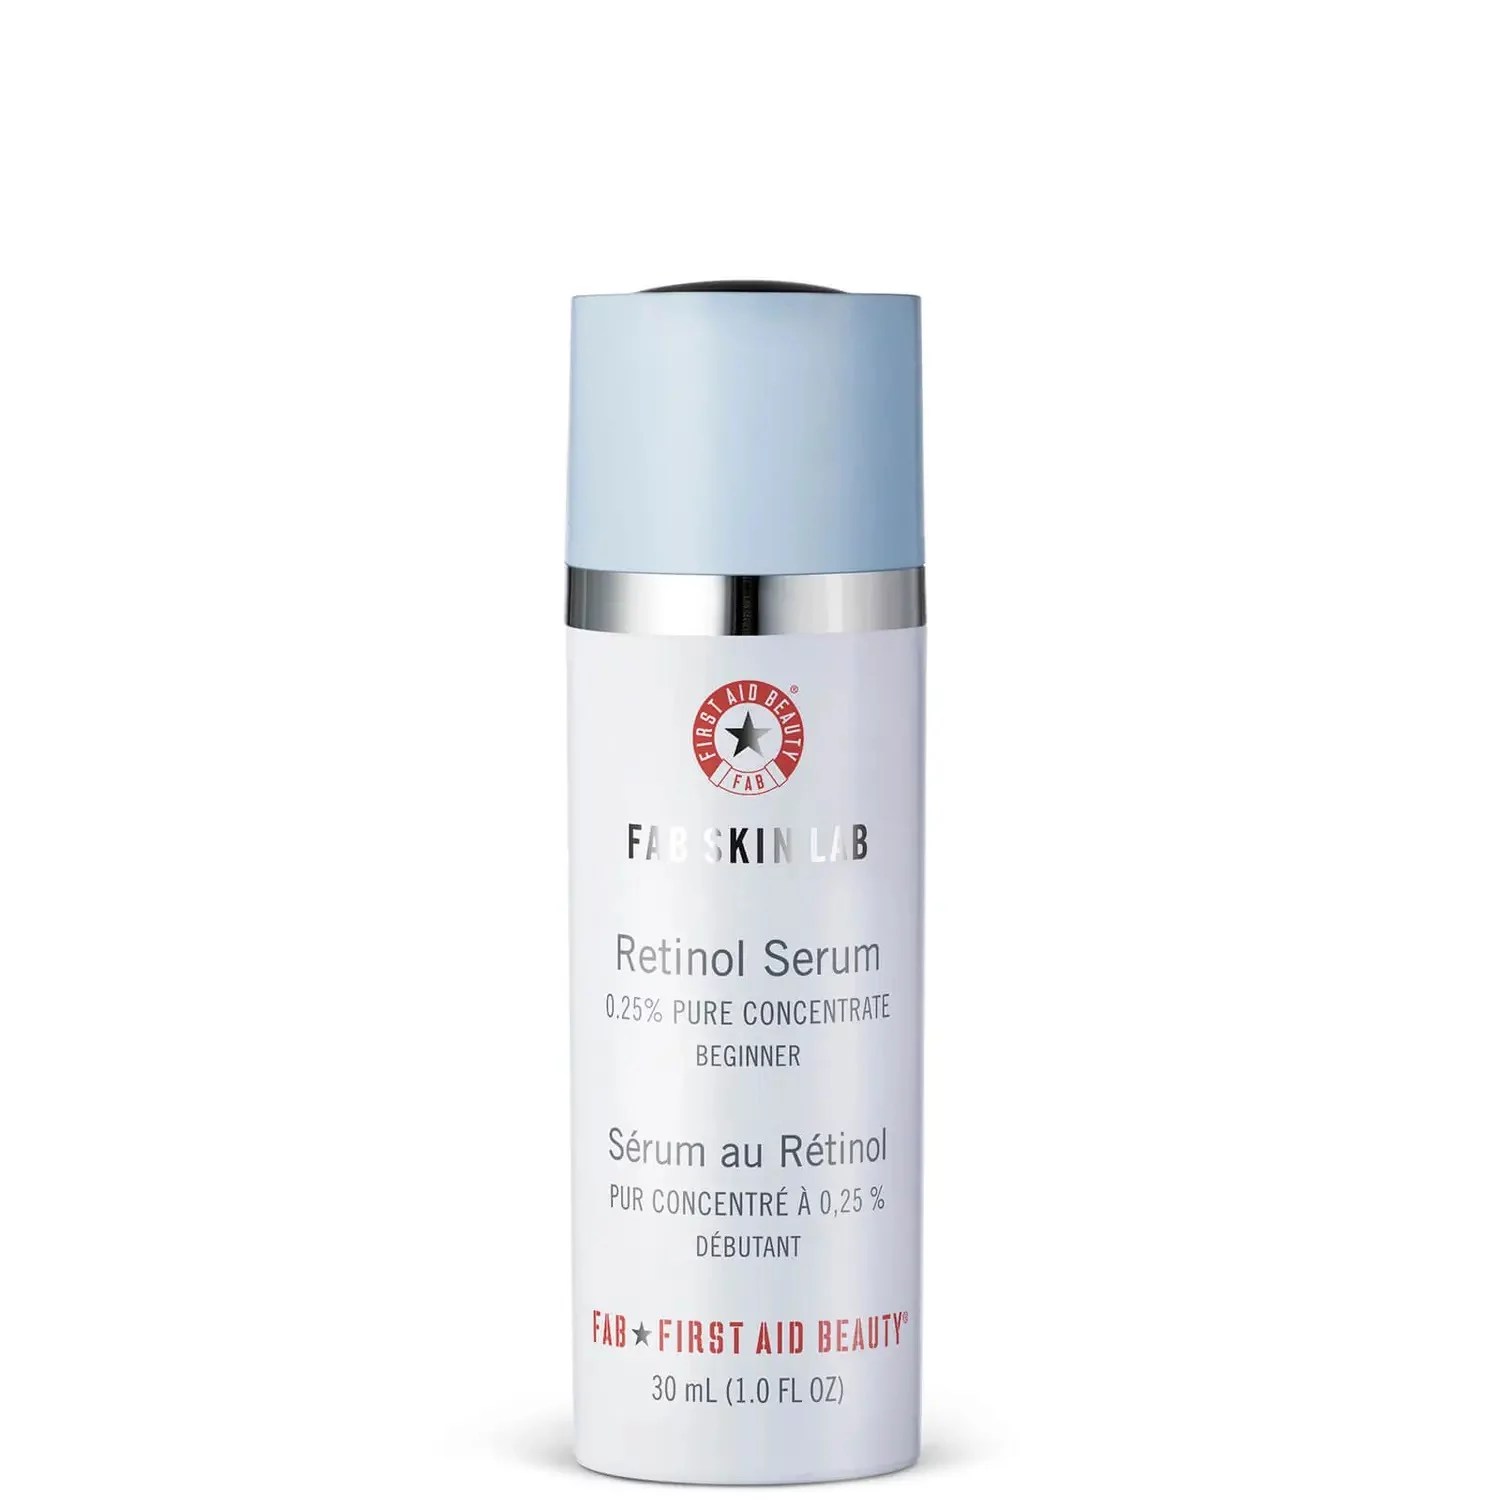 First Aid Beauty FAB Skin Lab Retinol Serum 0.25 Pure Concentrate